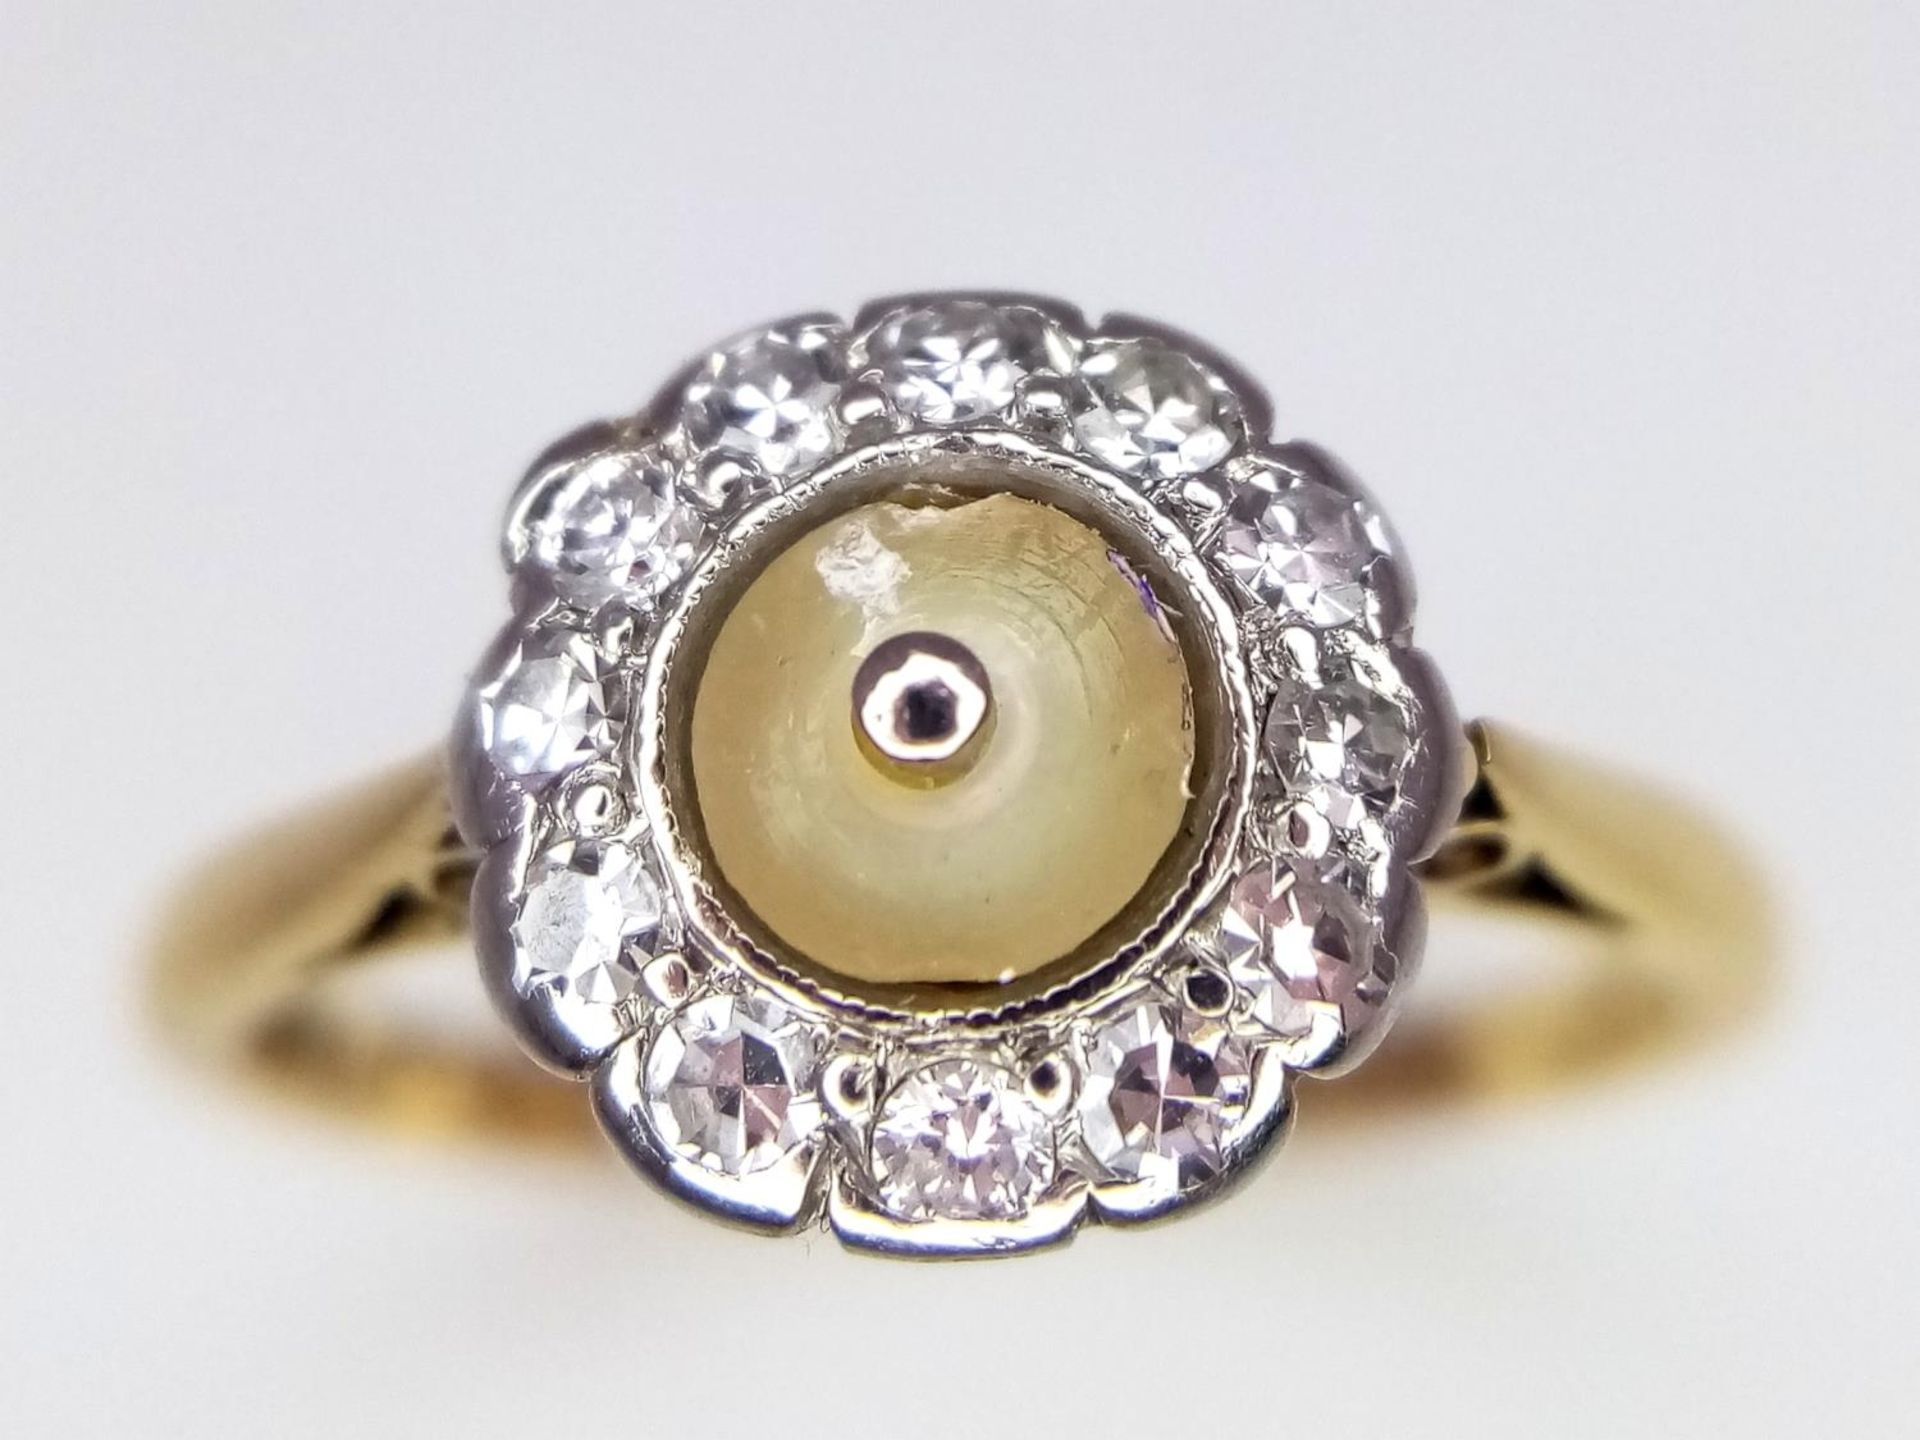 AN 18K YELLOW GOLD & PLATINUM DIAMOND RING. 0.35ctw, size L, 2.5g total weight. Ref: SC 9046 - Image 2 of 5